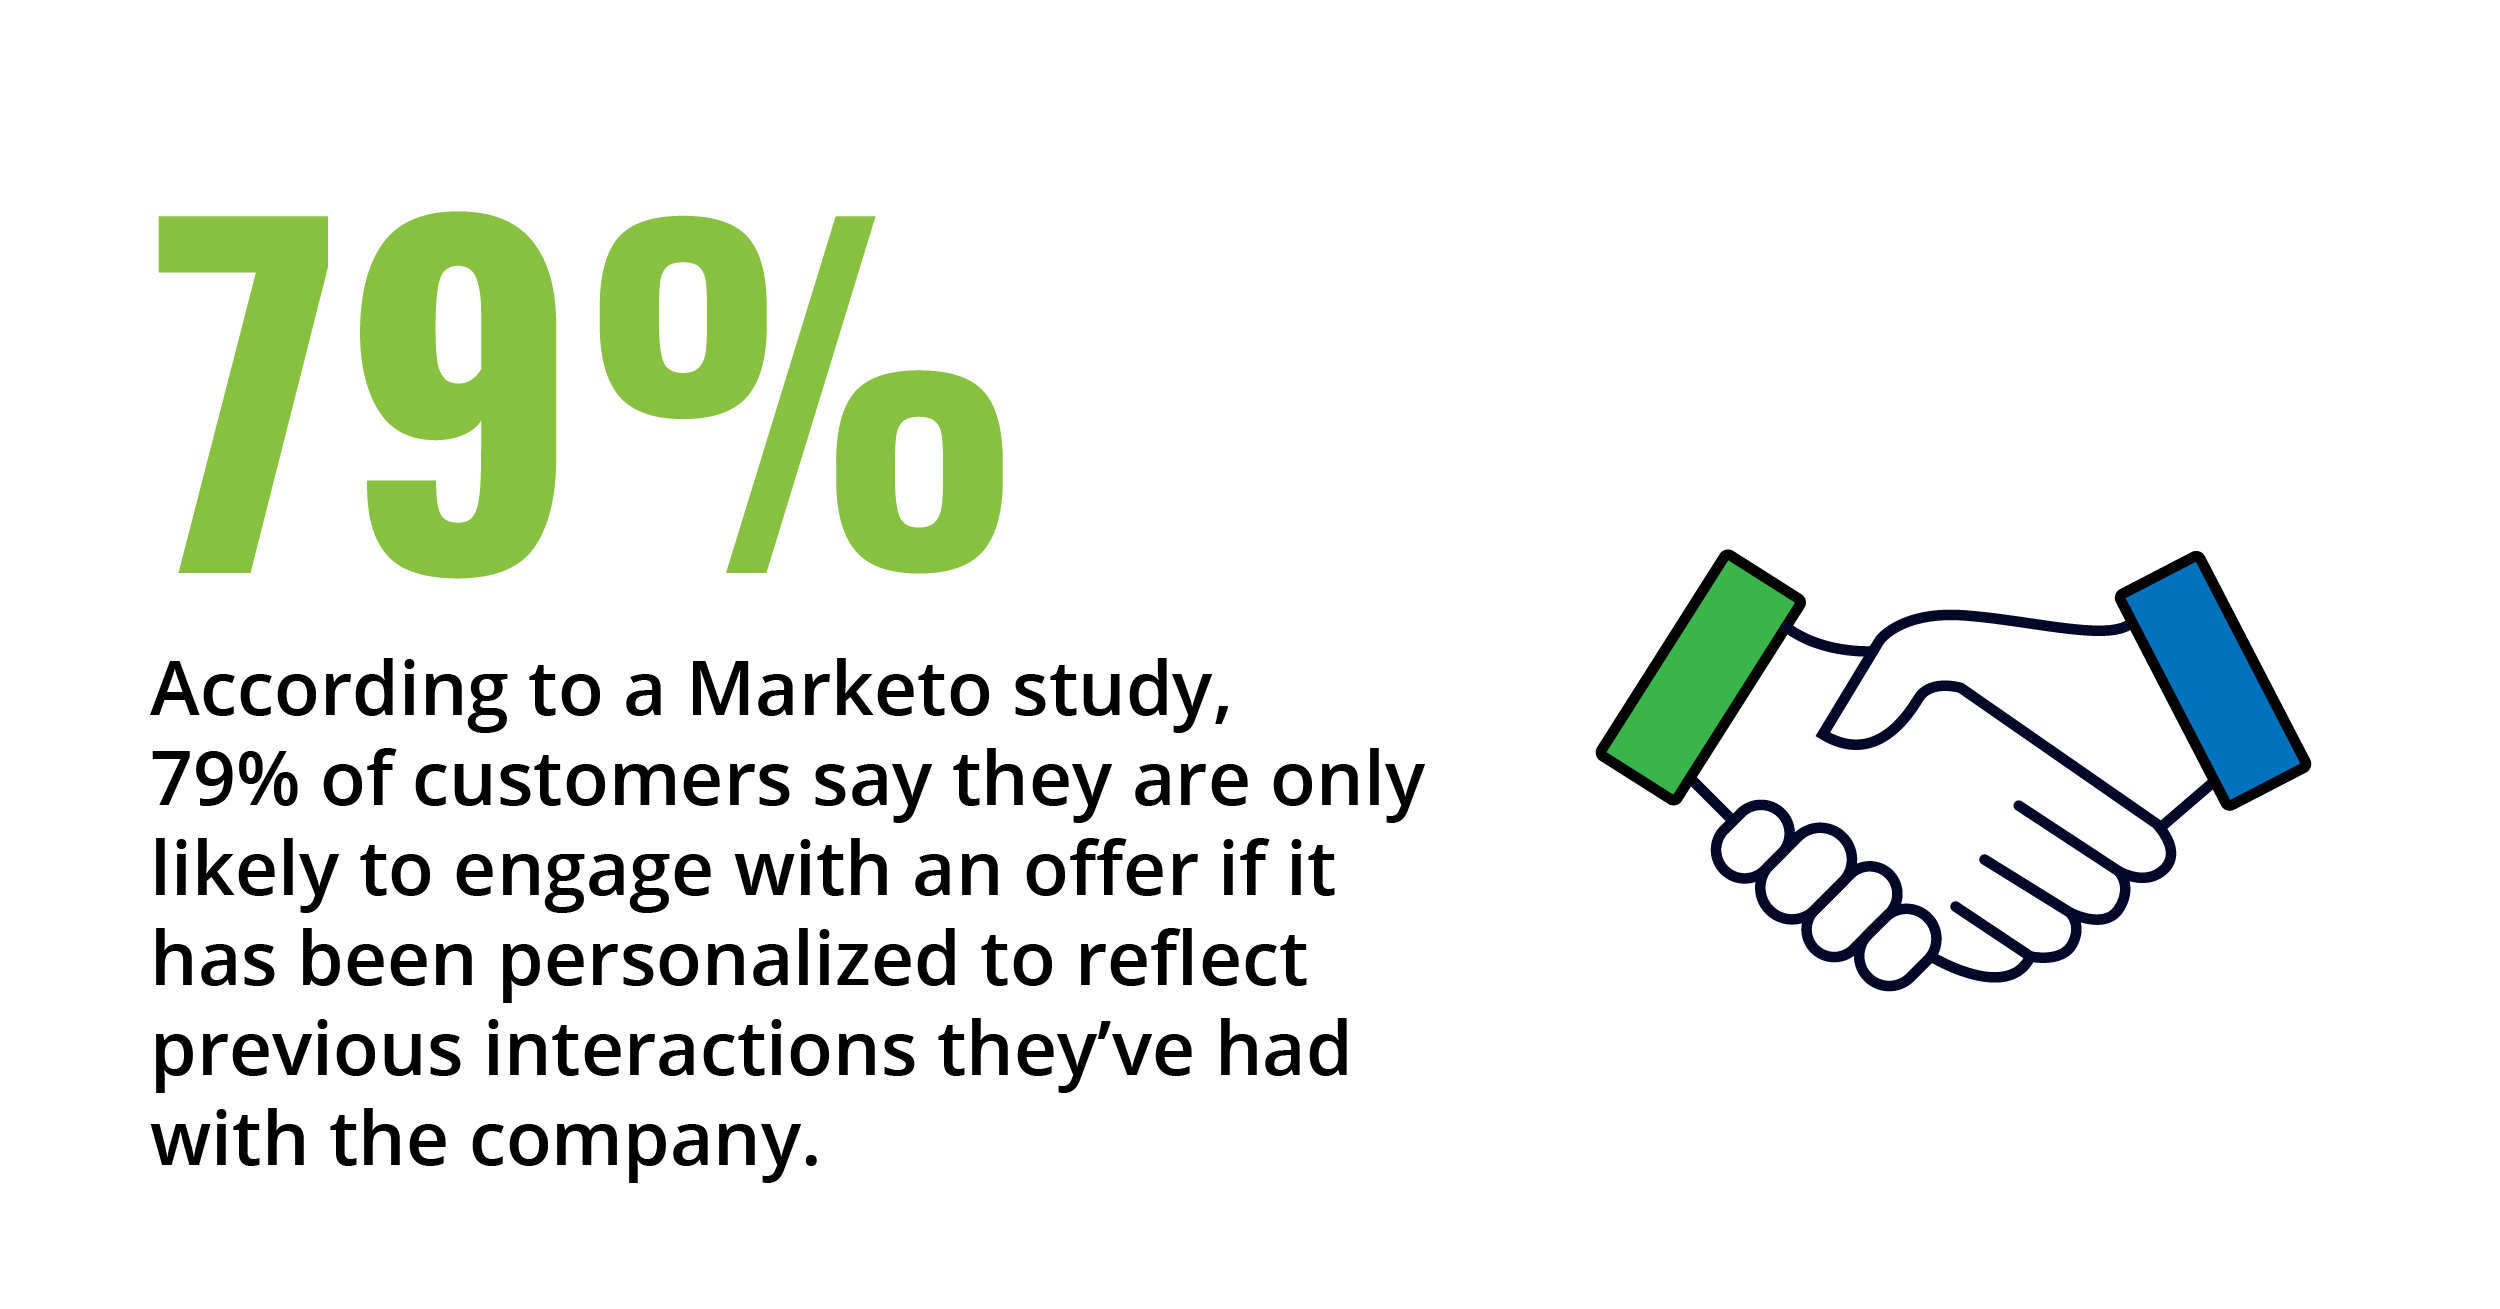 According to a Marketo study, 79% of customers say they are only likely to engage with an offer if it has been personalized to reflect previous interactions they’ve had with the company.